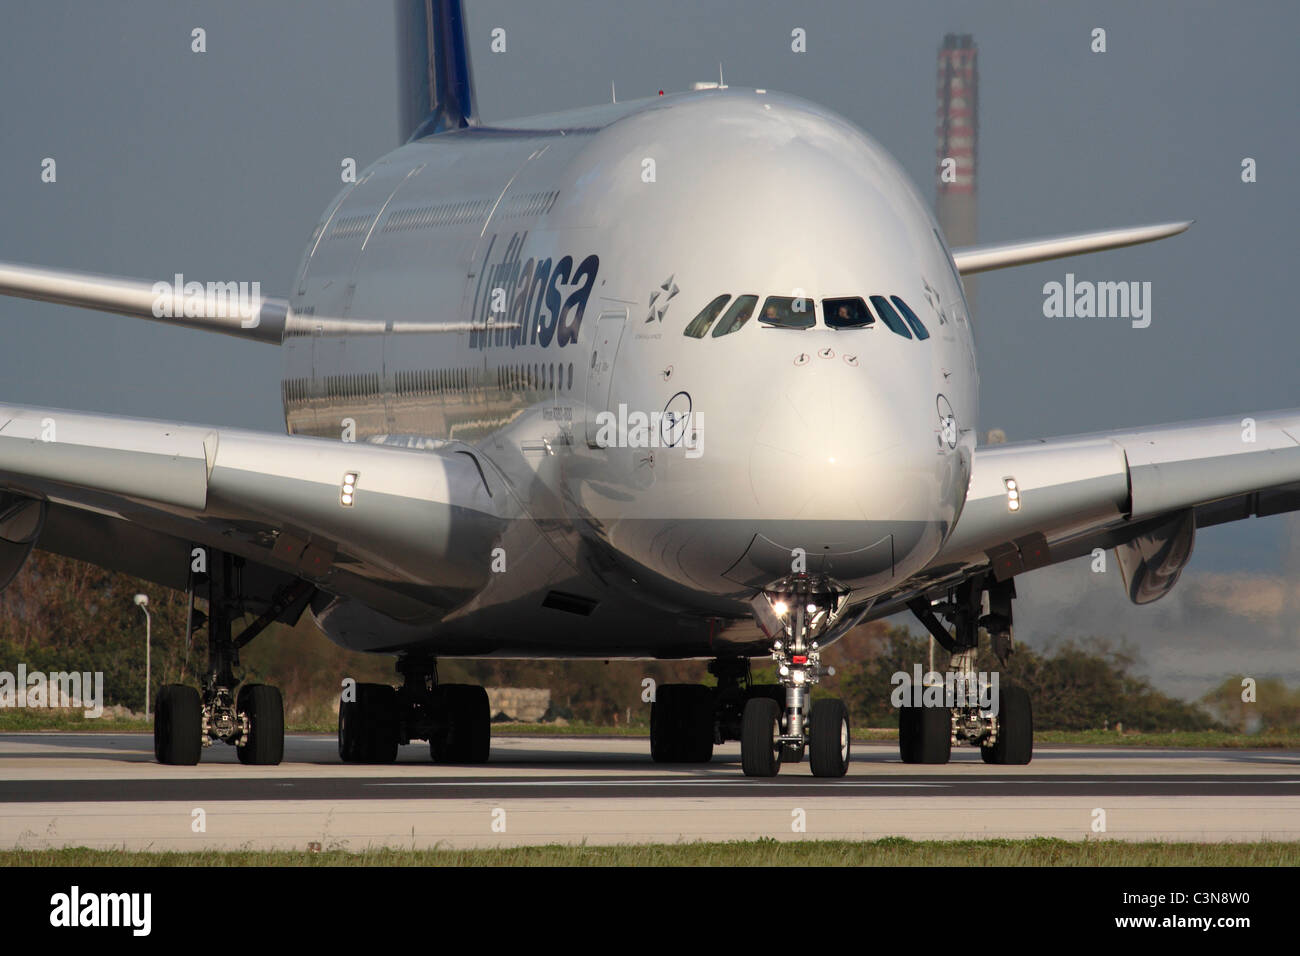 Lufthansa Airbus A380 long-haul passenger jet lining up for departure from Malta. Closeup front view emphasizing the large size of this plane. Stock Photo